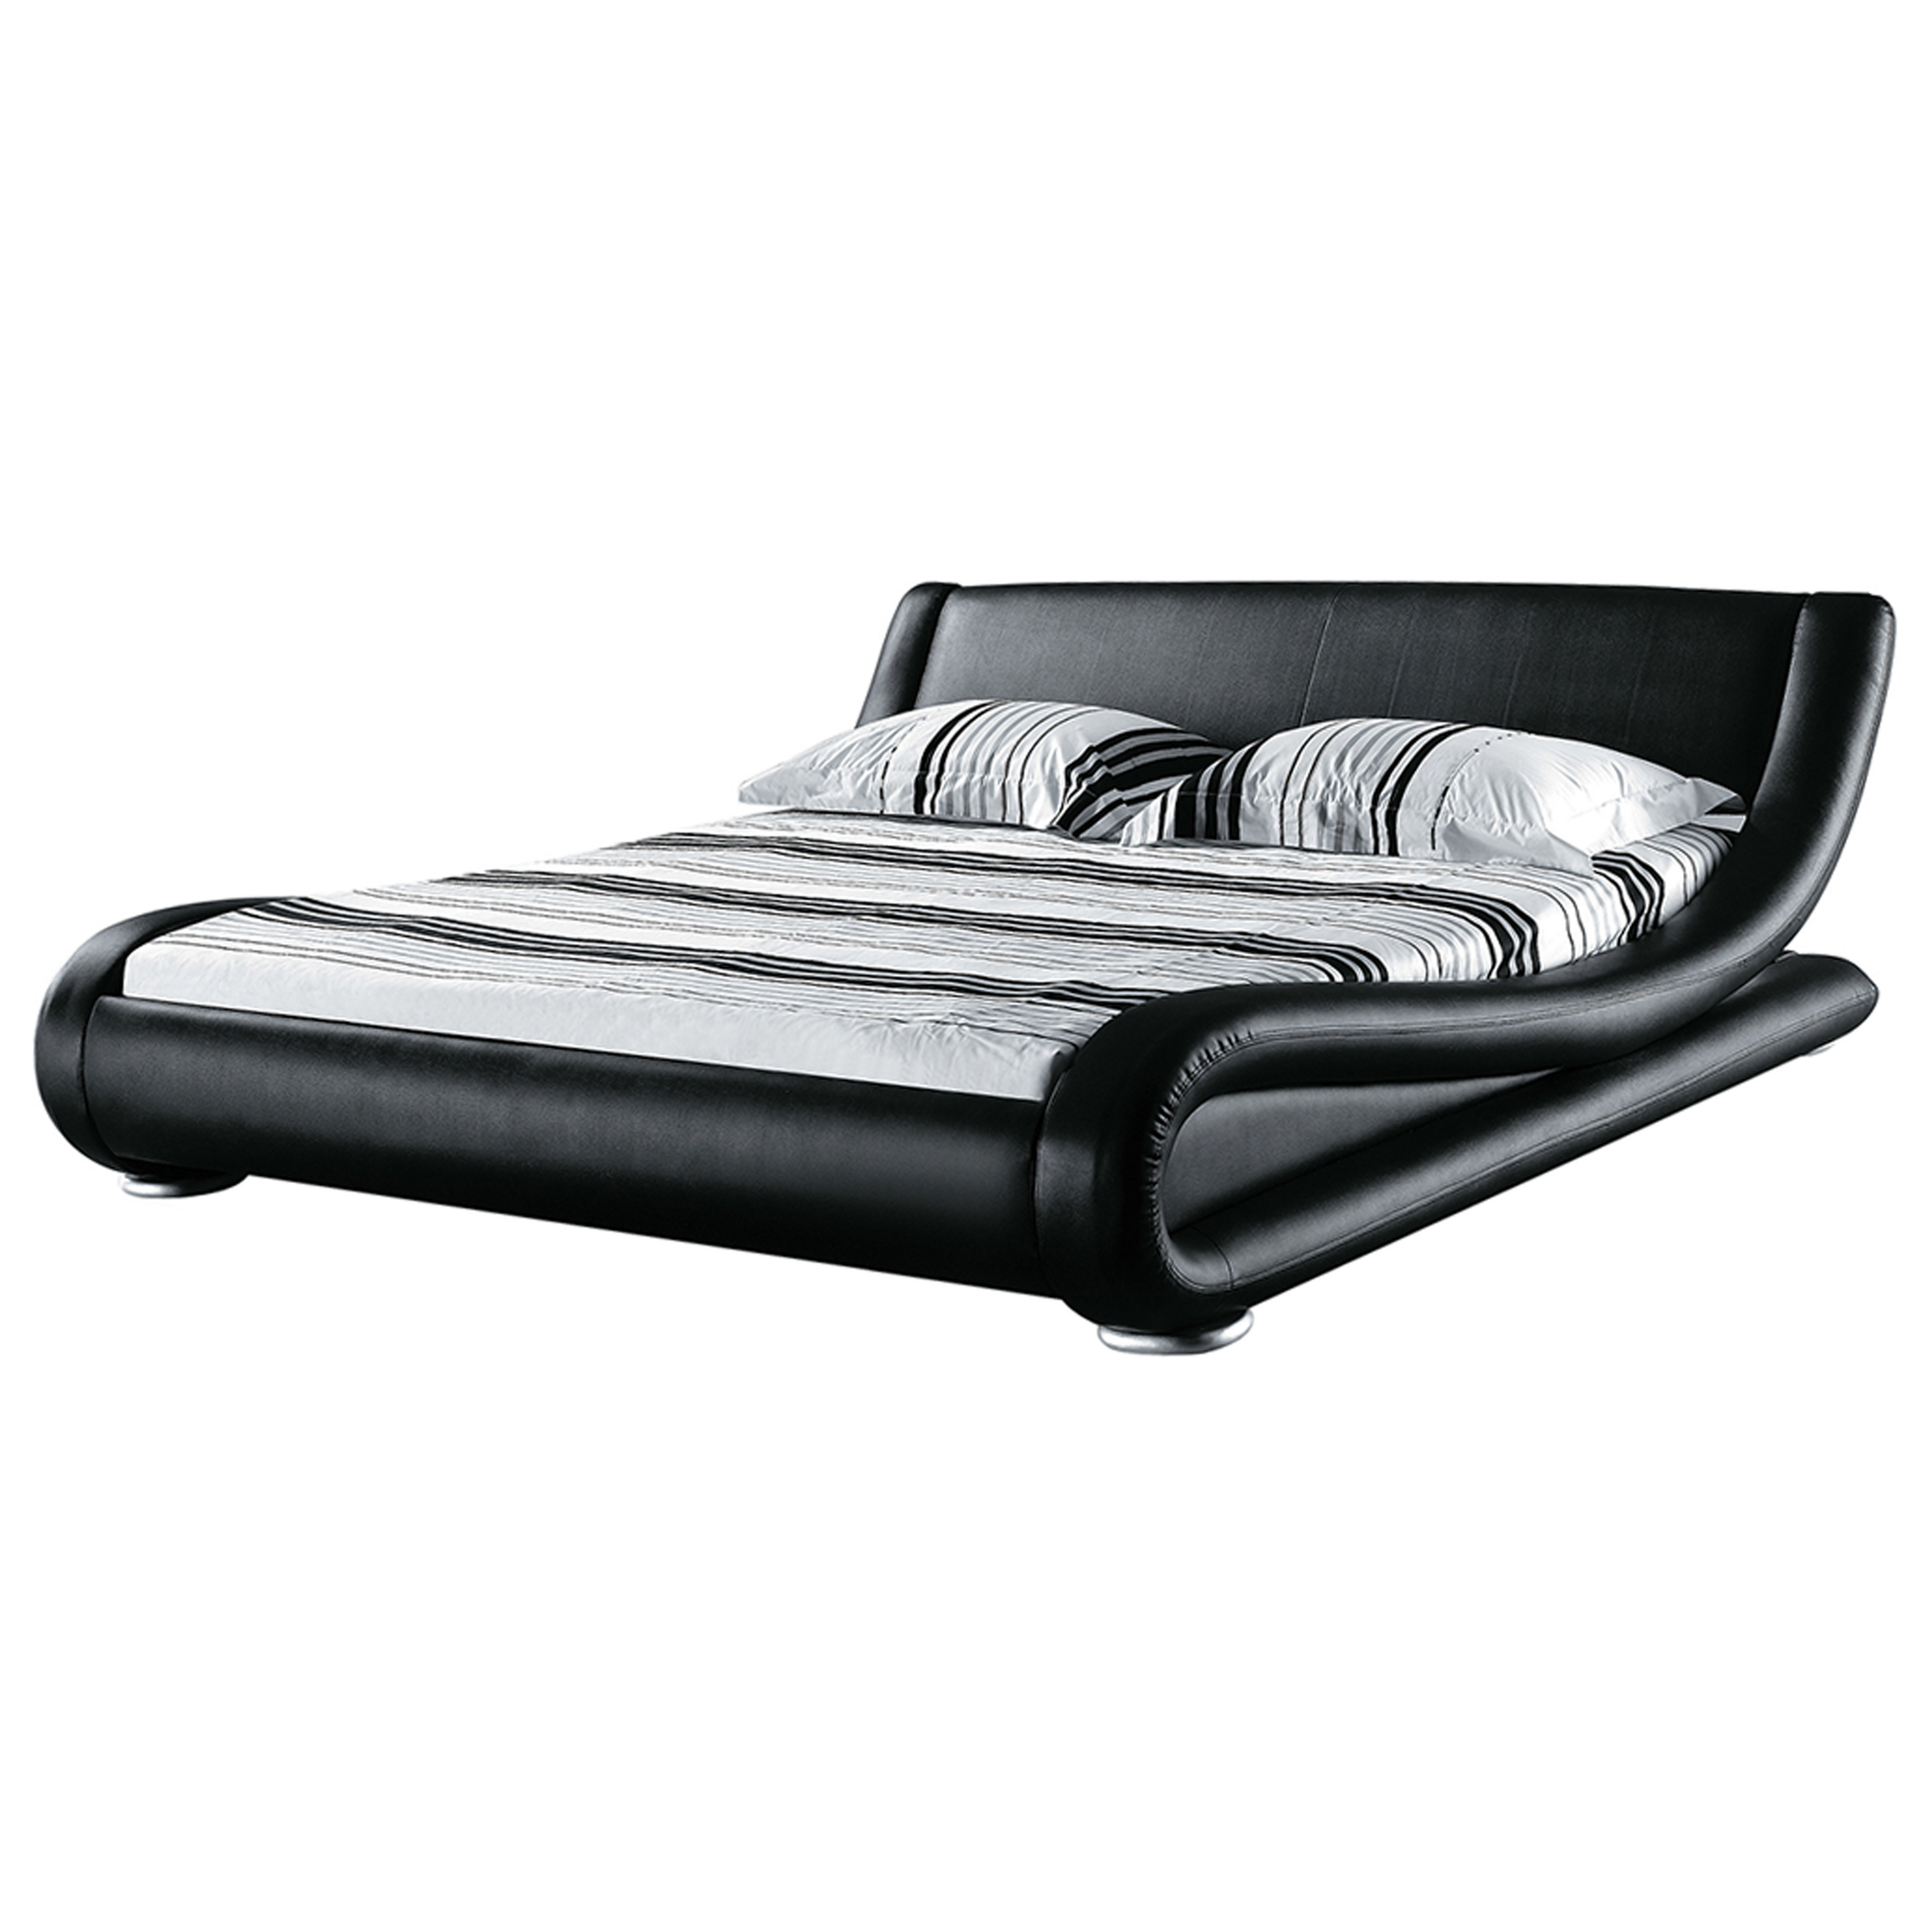 Beliani Platform Waterbed Black Genuine Leather Upholstered with Mattress and Accessories 6ft EU Super King Size Sleigh Design